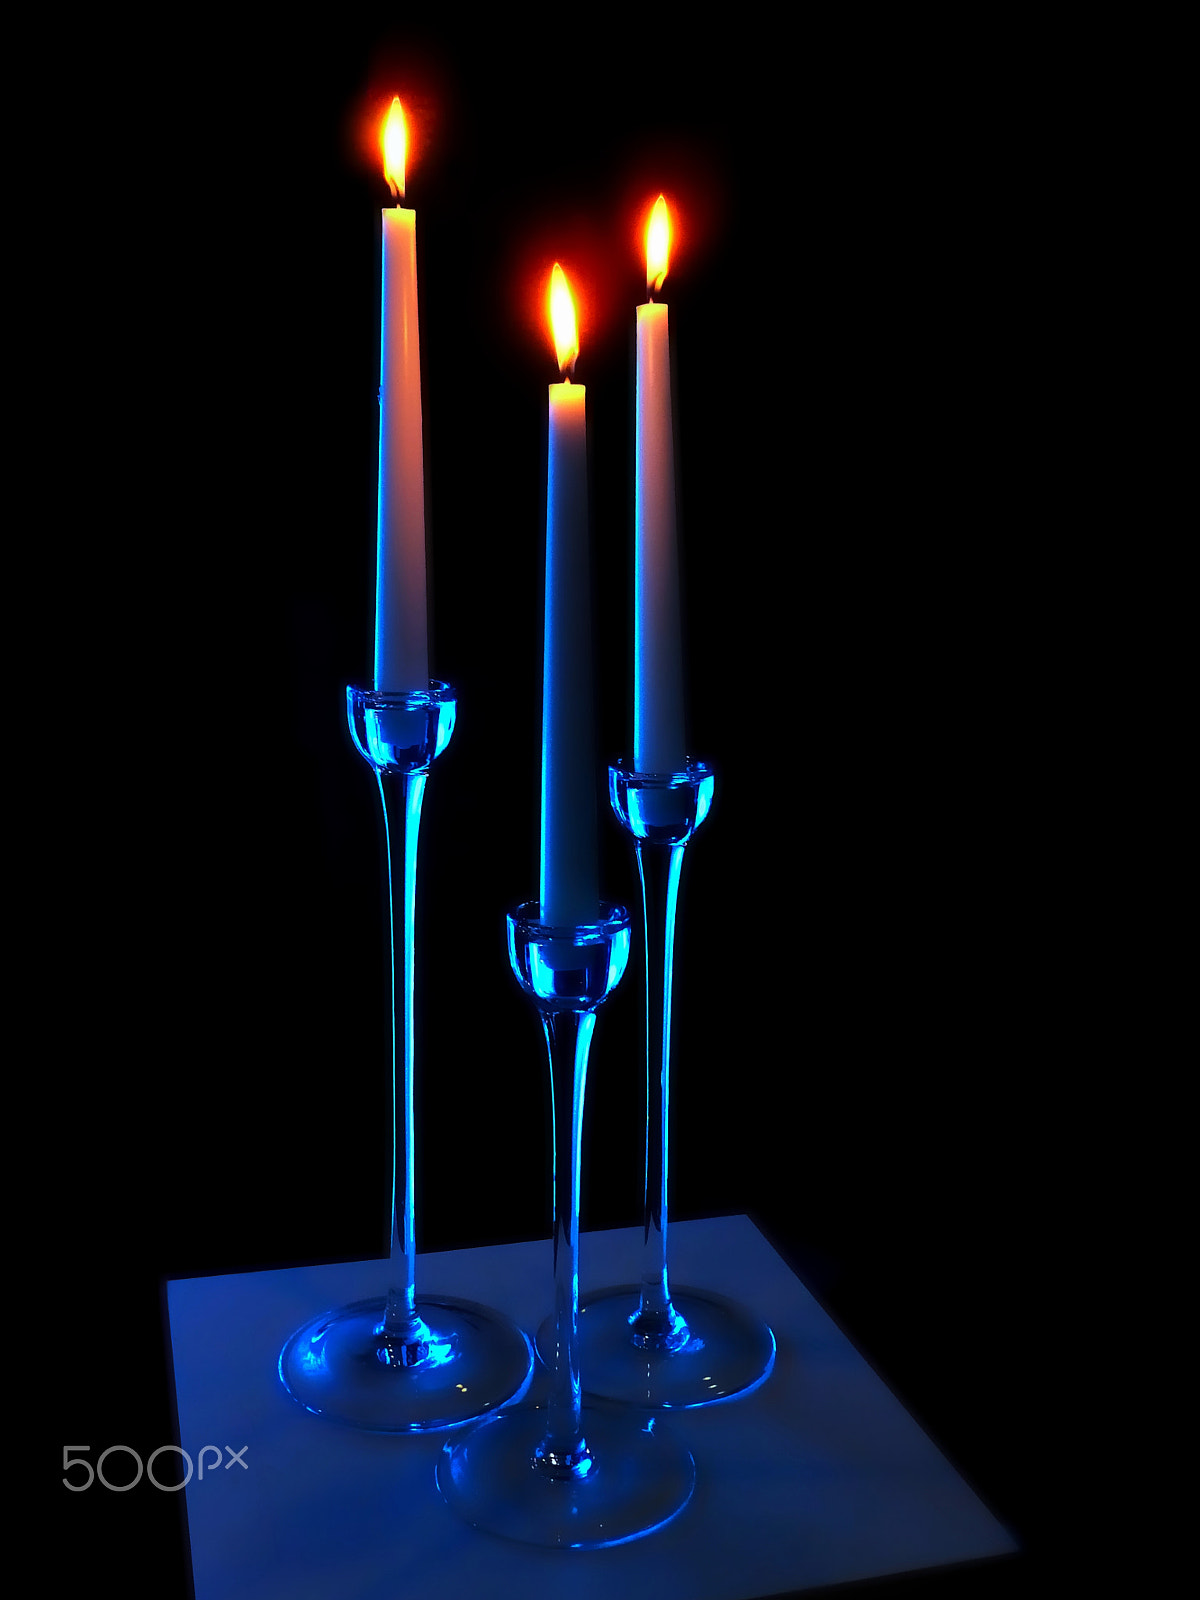 Olympus TG-830 sample photo. Blue candles photography